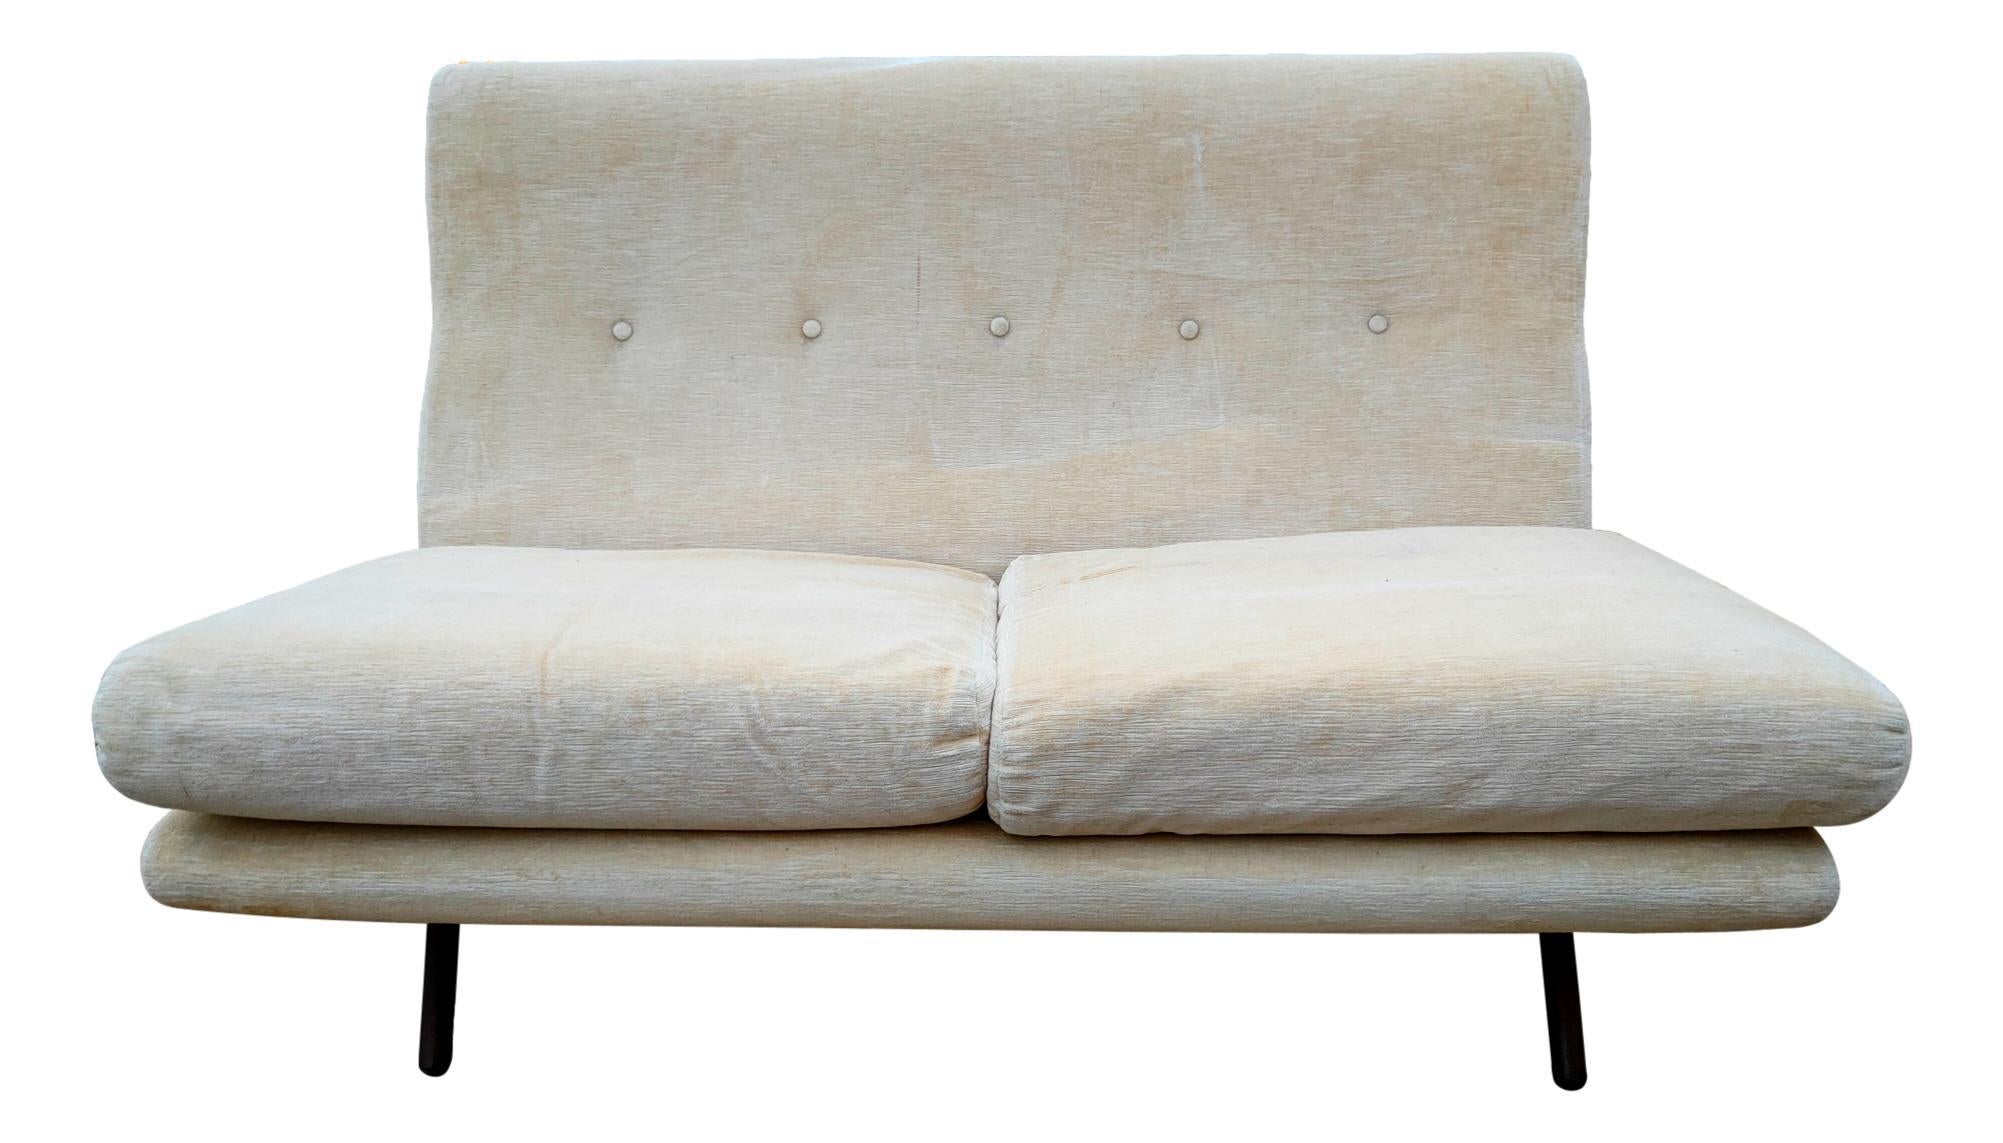 Rare two-seater sofa produced by Arflex, 